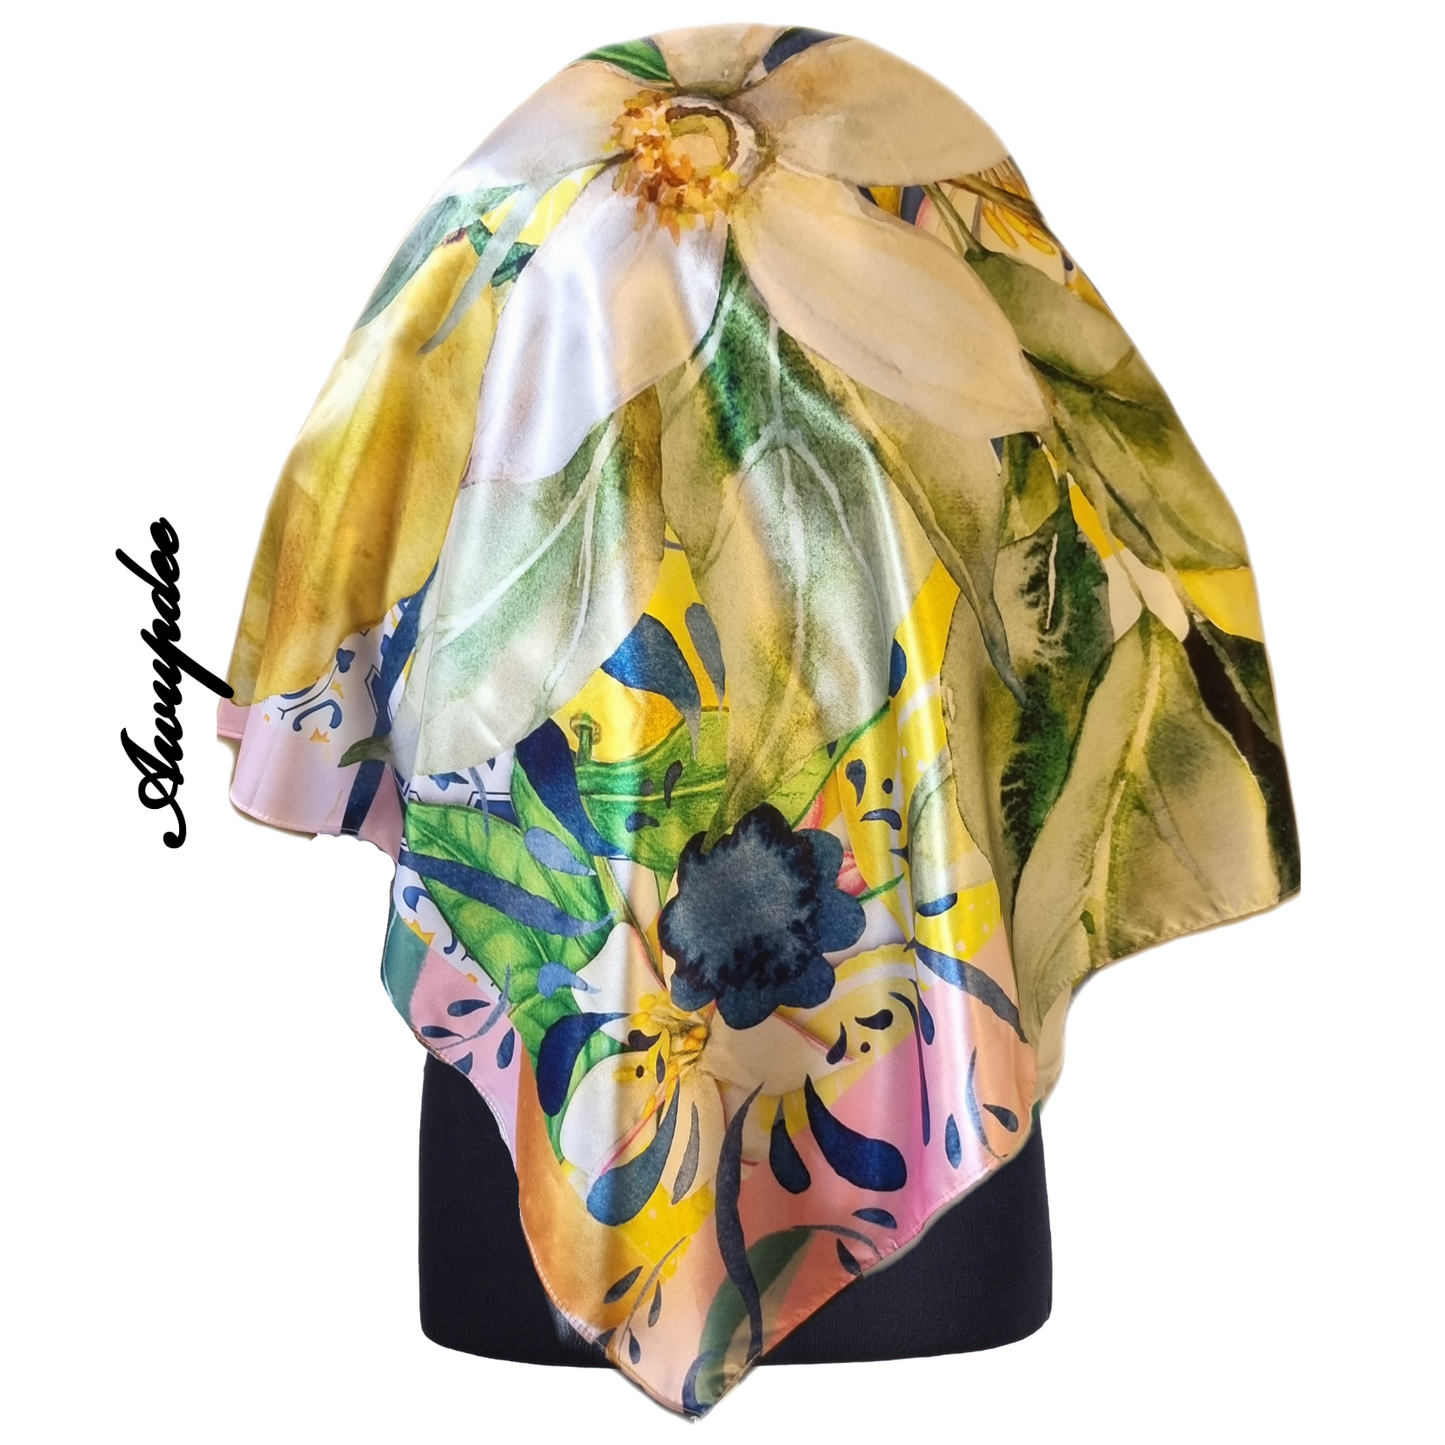 Awupdee Designer Satin Scarf Eclectic 002